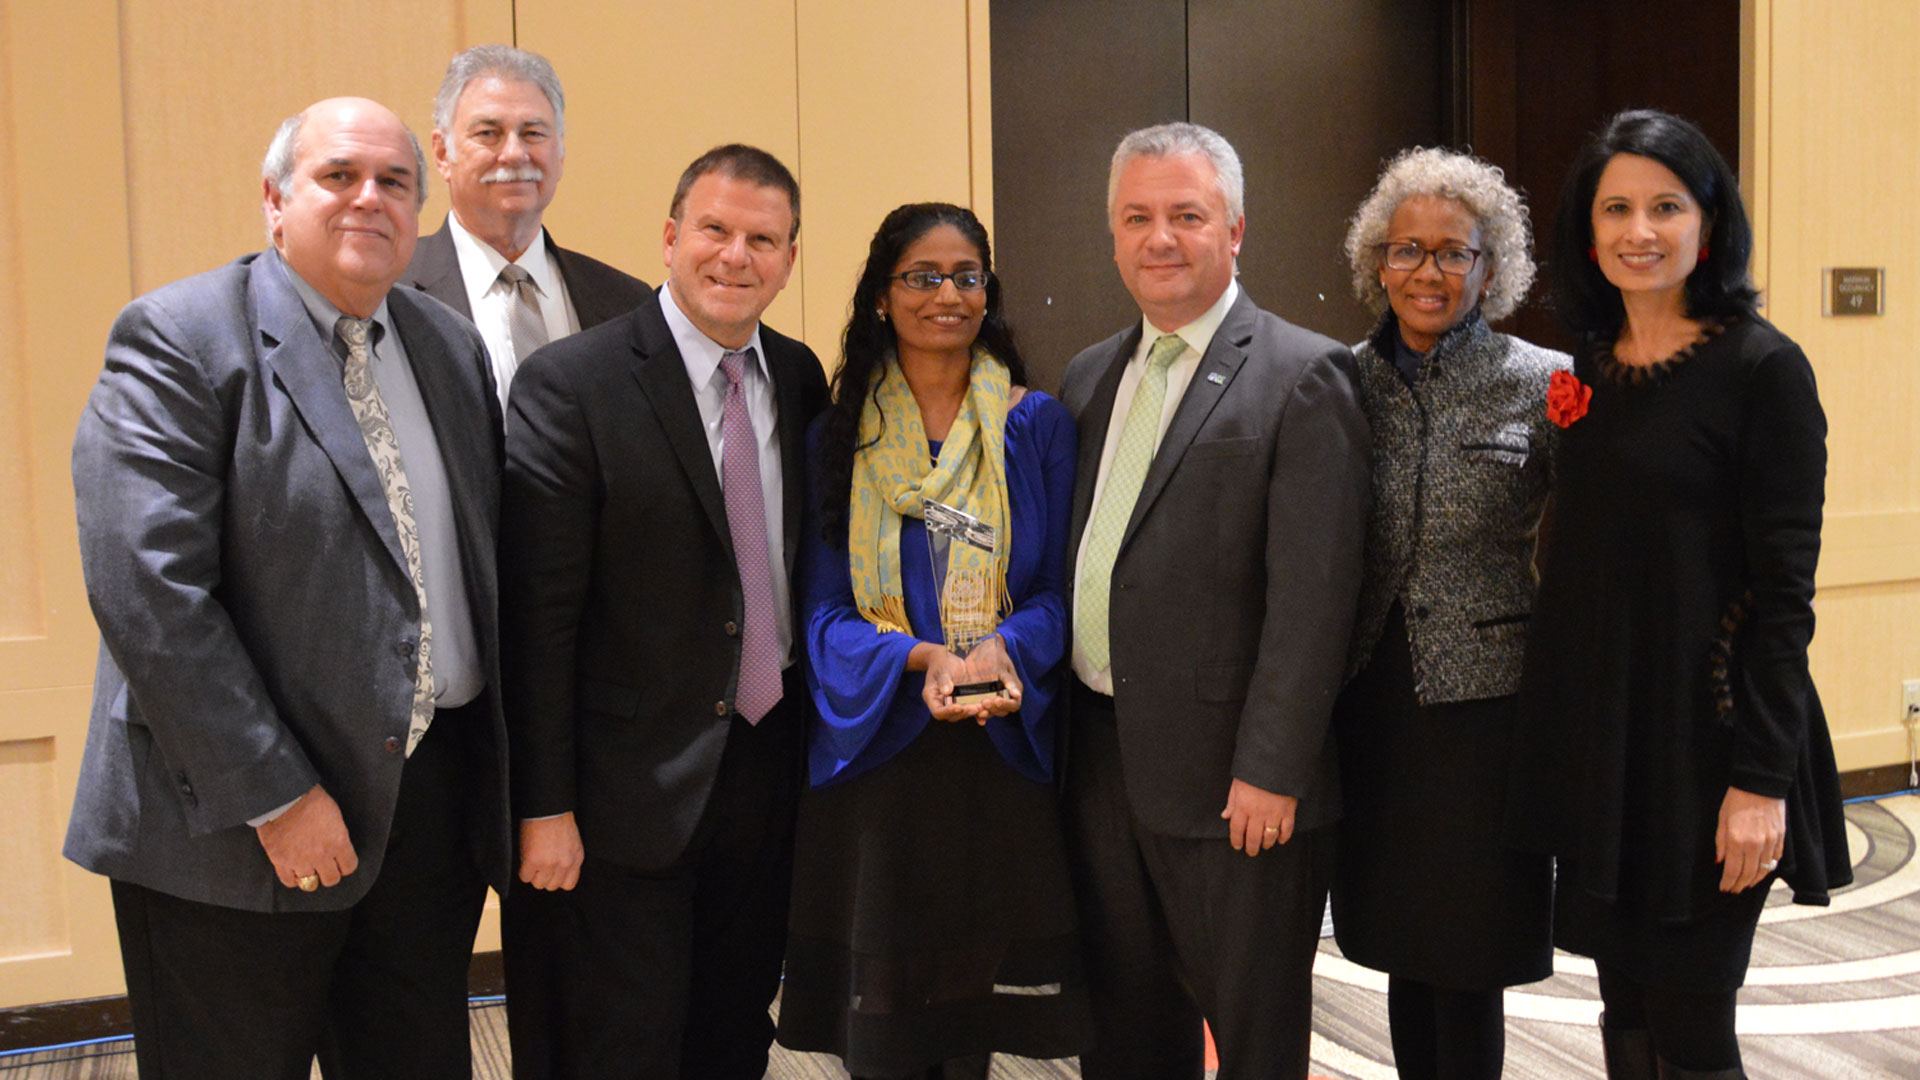 UHCL offenders program receives Regents' Academic Excellence Award